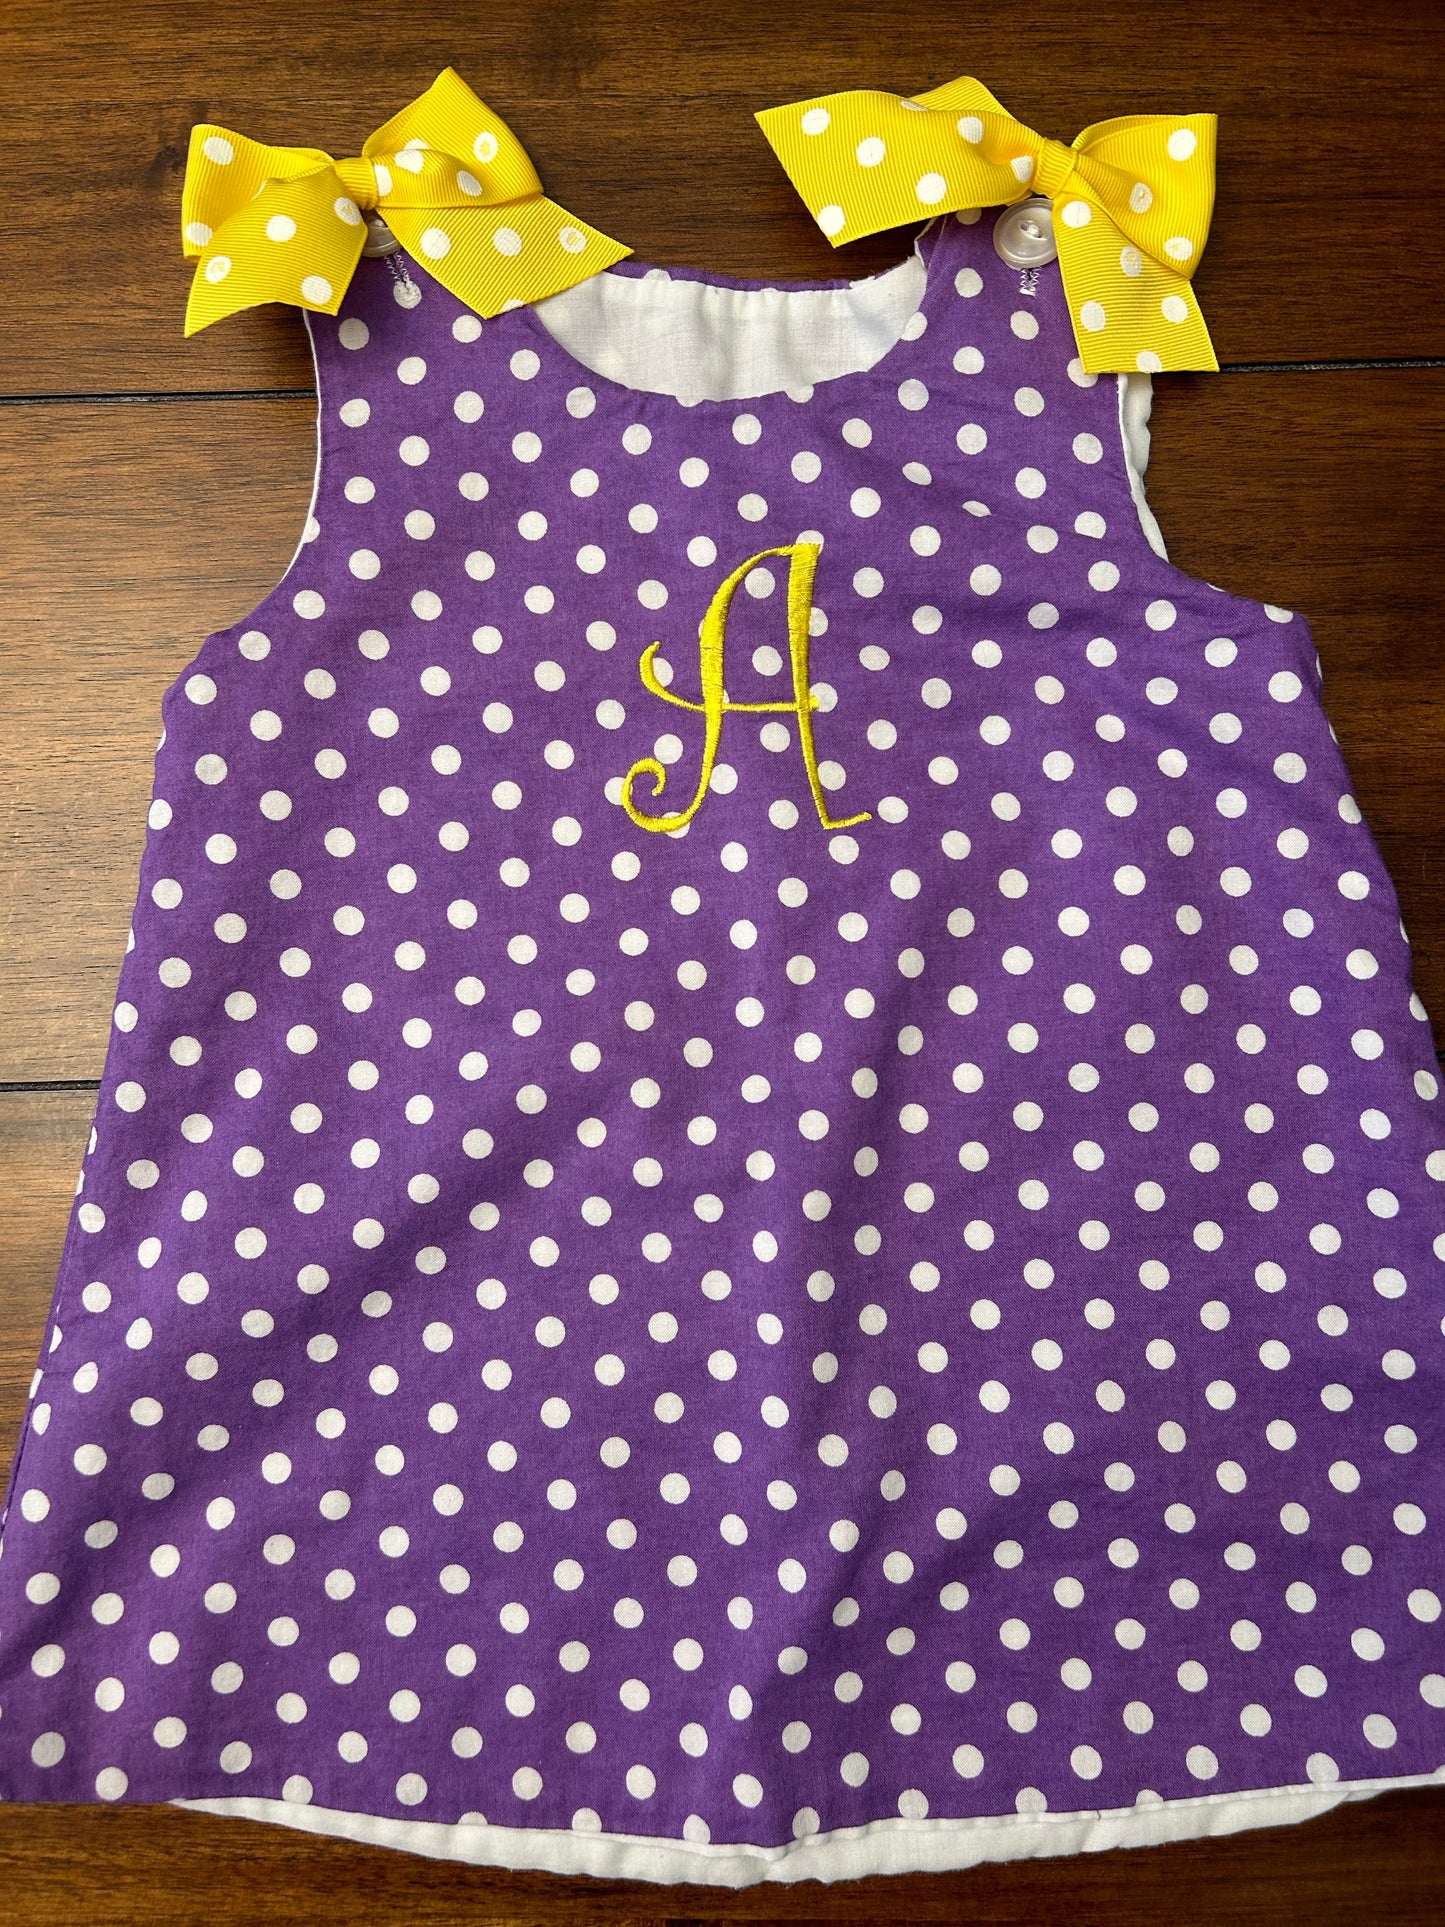 Handmade Girls Purple Dress with White Polka Dots and Yellow Embroidered "A"Size 2T PPU 45040